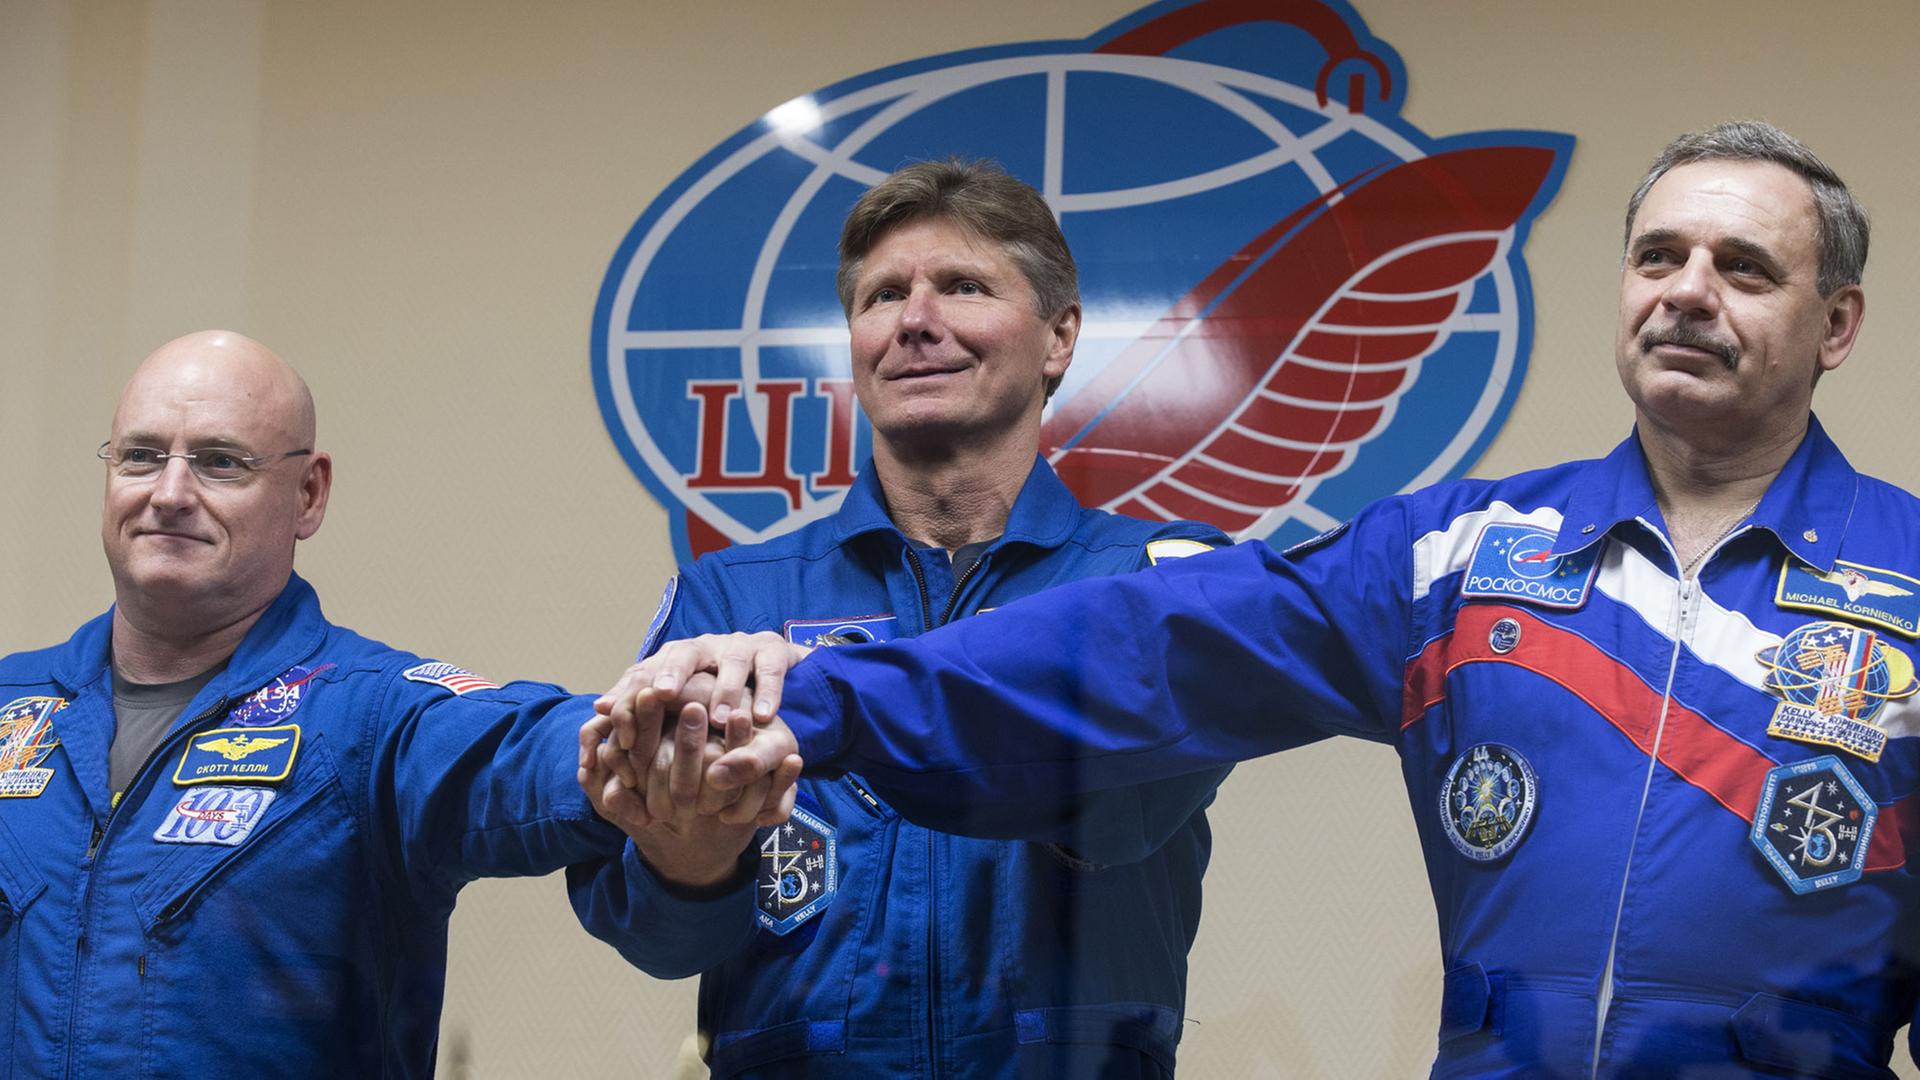 US austronaut Scott Kelly (NASA) and Russian austronauts Gennady Padalka, Mikhail Kornienko (RSA), from left, members of the main crew of Expedition 43/44 to the International Space Station, pose for a group photo at a press conference ahead of the start of a one-year mission.